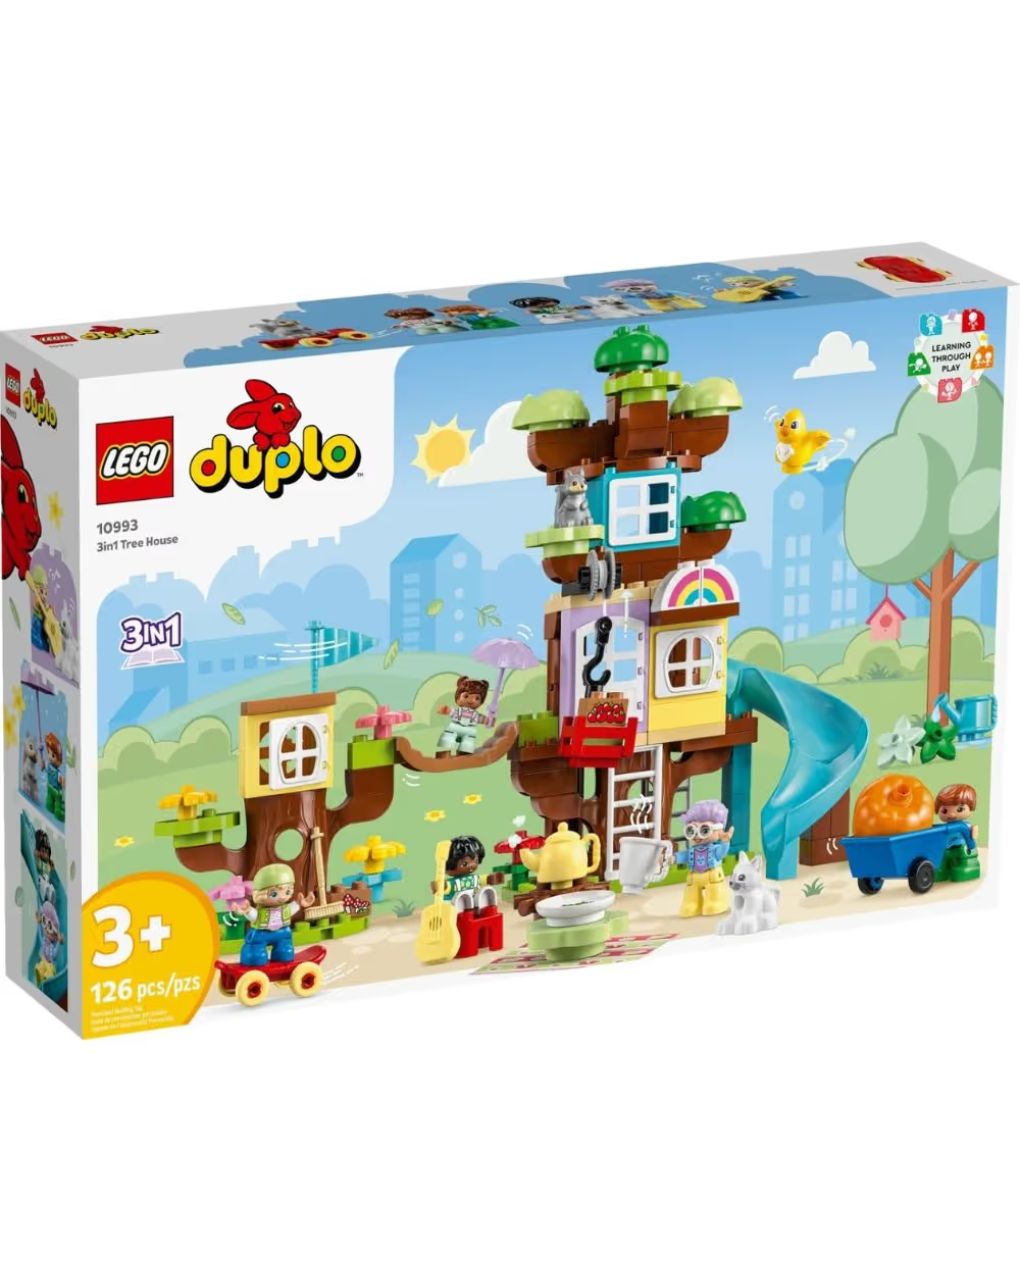 Lego duplo 3in1 tree house 10993